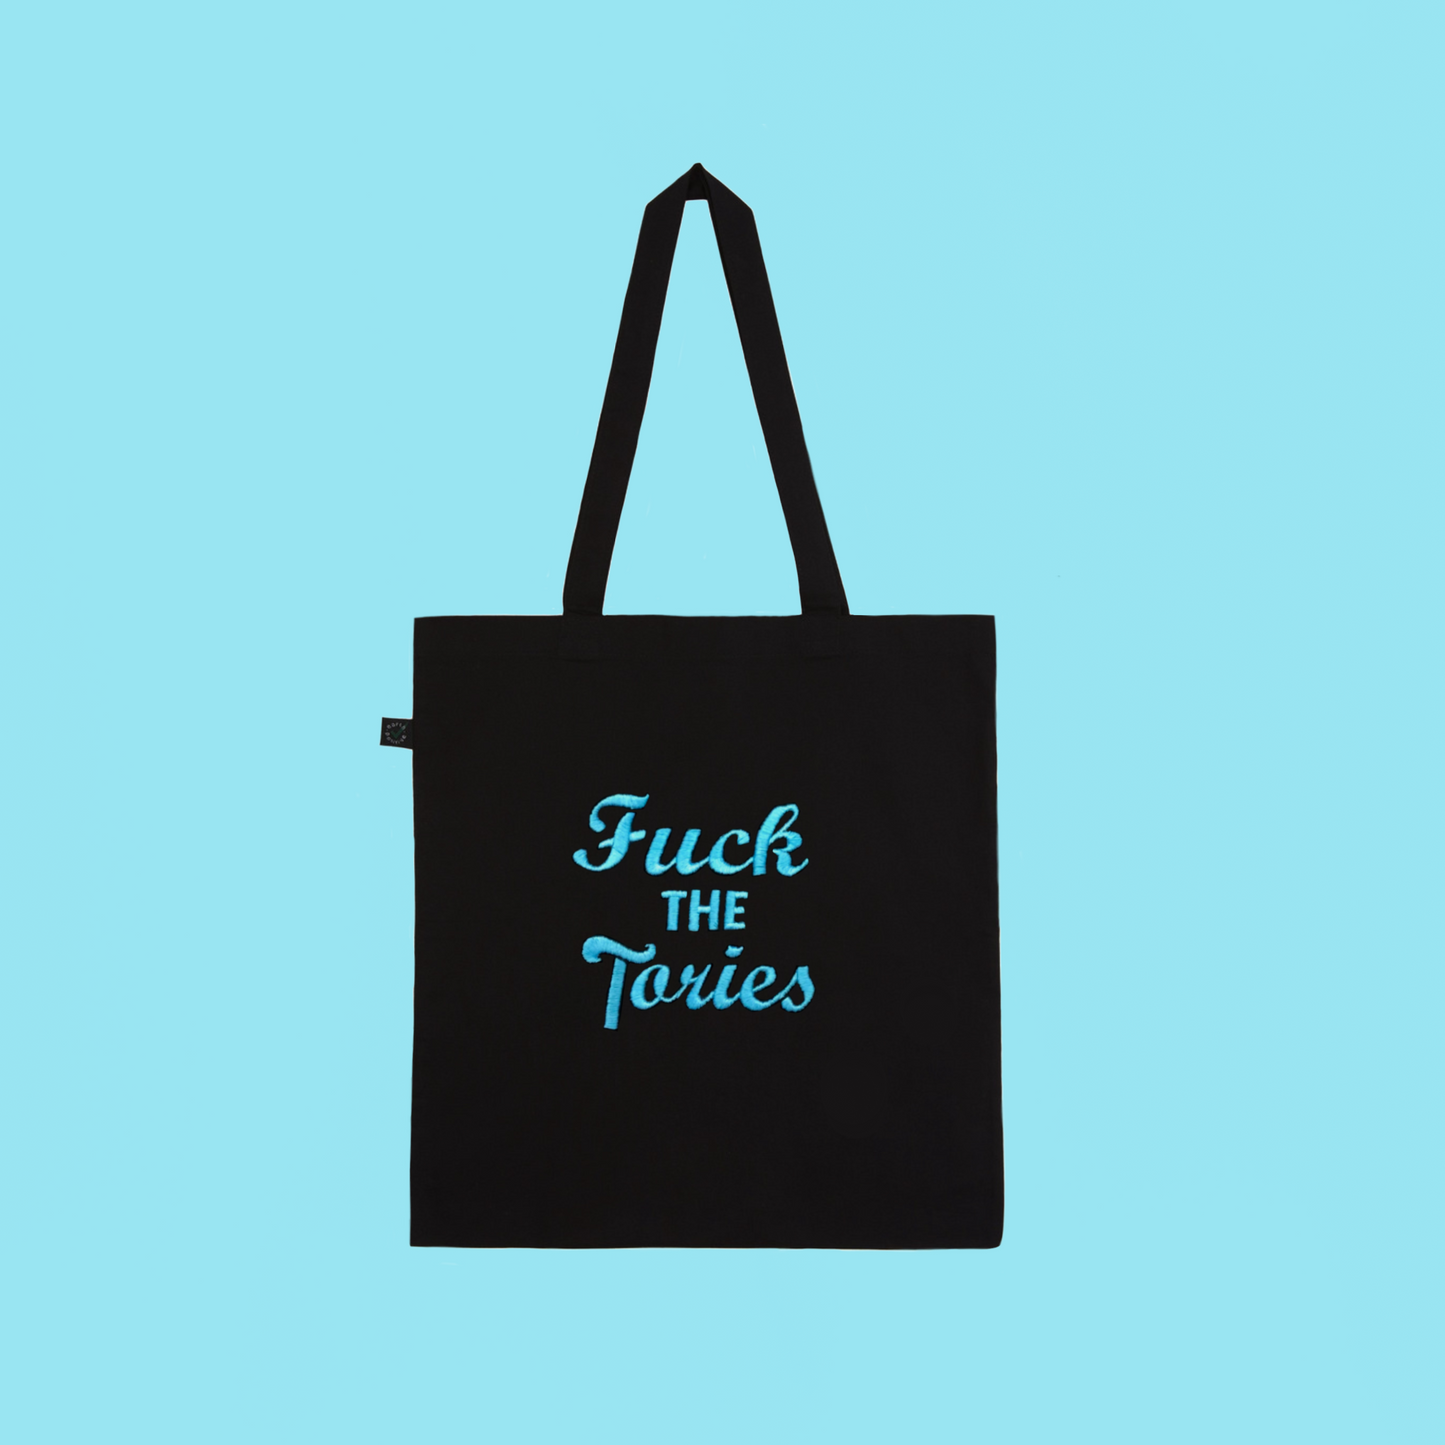 F*ck The Tories  - Embroidered Earth Positive Ethical tote